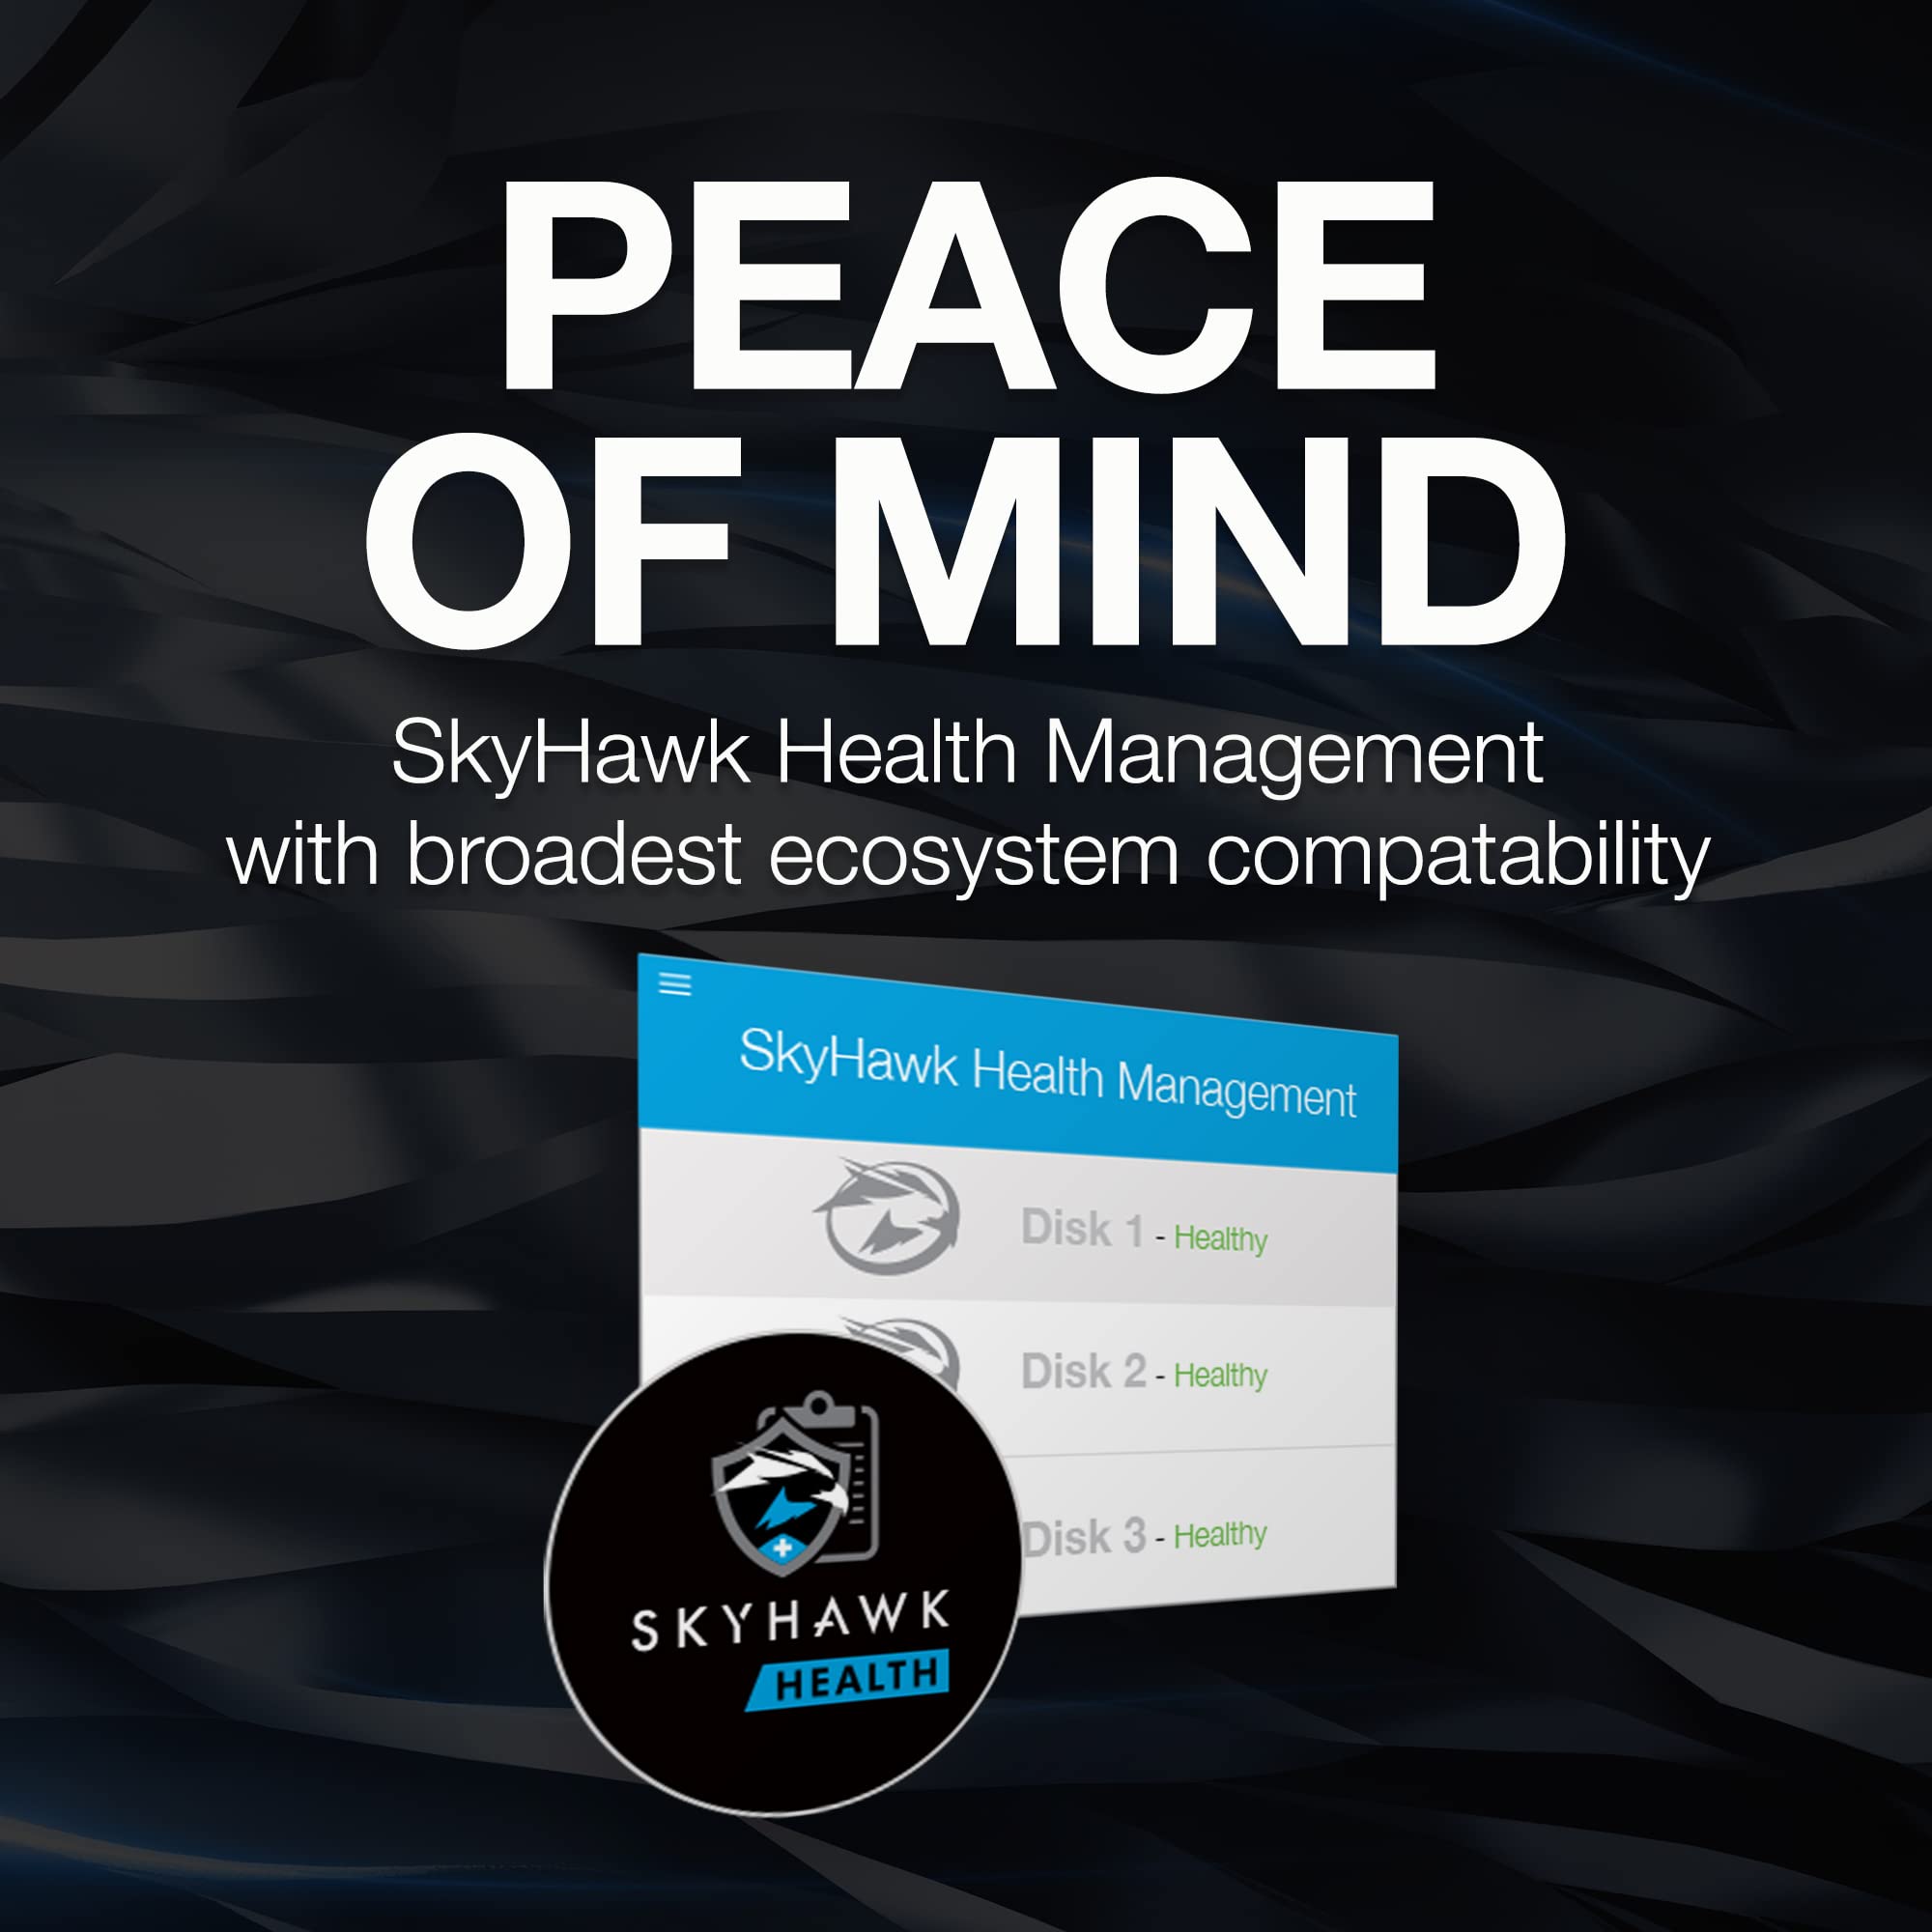 Seagate SkyHawk 6TB Surveillance Internal Hard Drive HDD – 3.5 Inch SATA 6GB/s 256MB Cache for DVR NVR Security Camera System with Drive Health Management – Frustration Free Packaging (ST6000VX001)